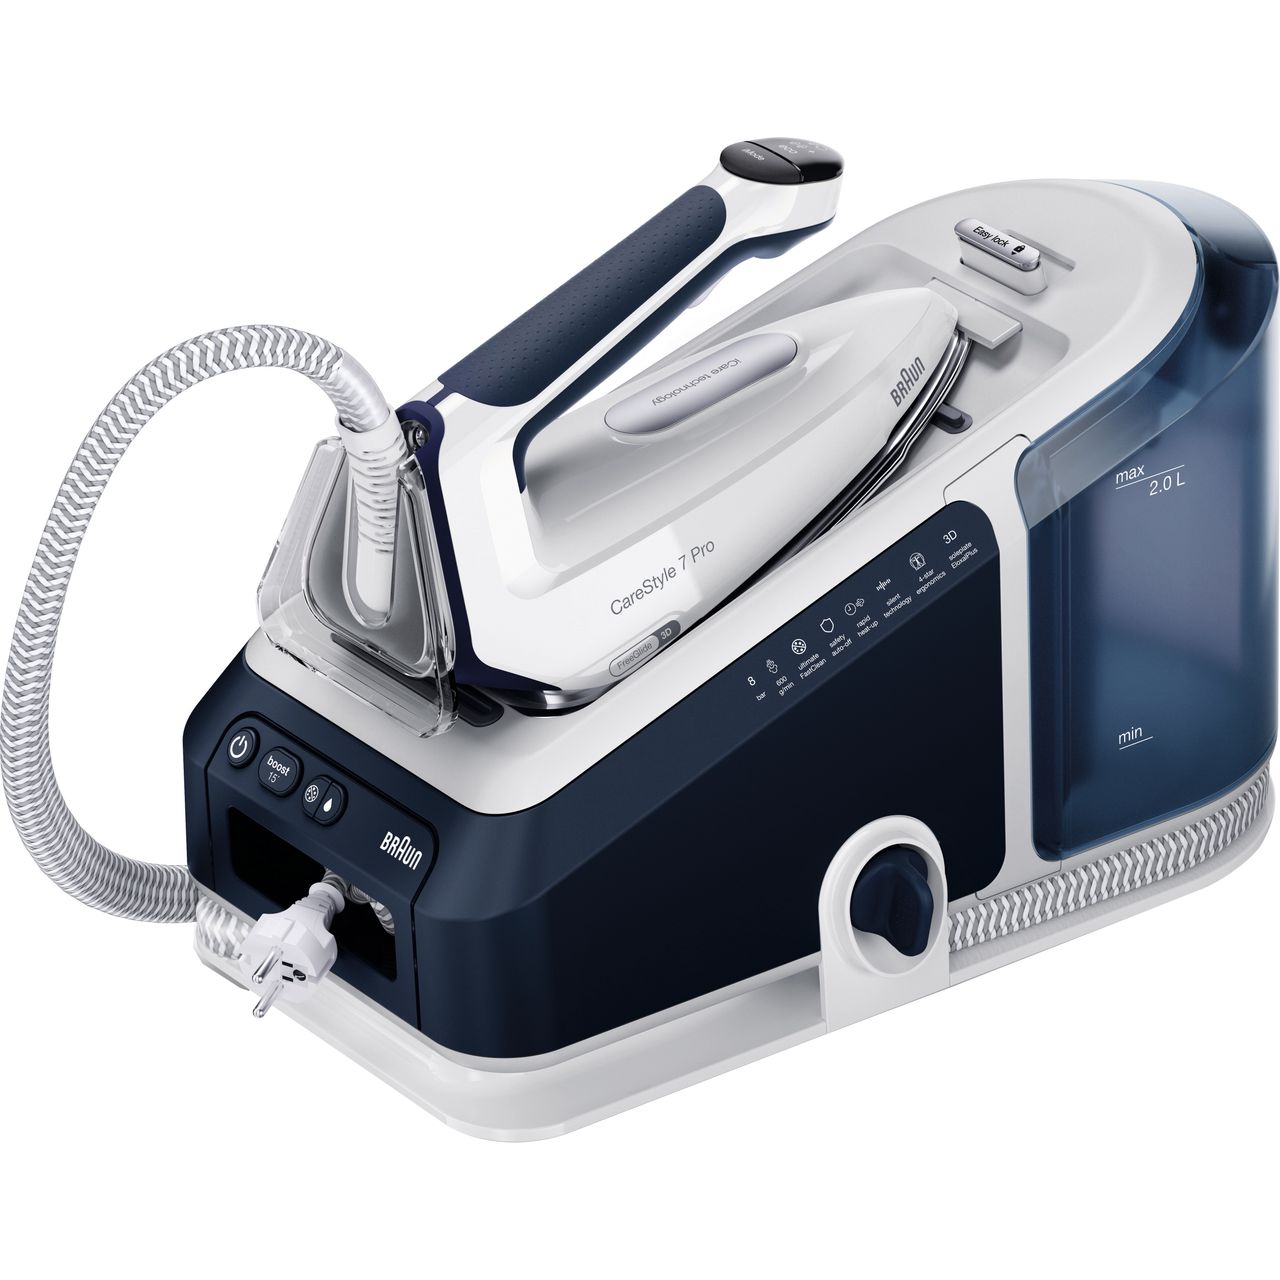 TexStyle Steam Irons